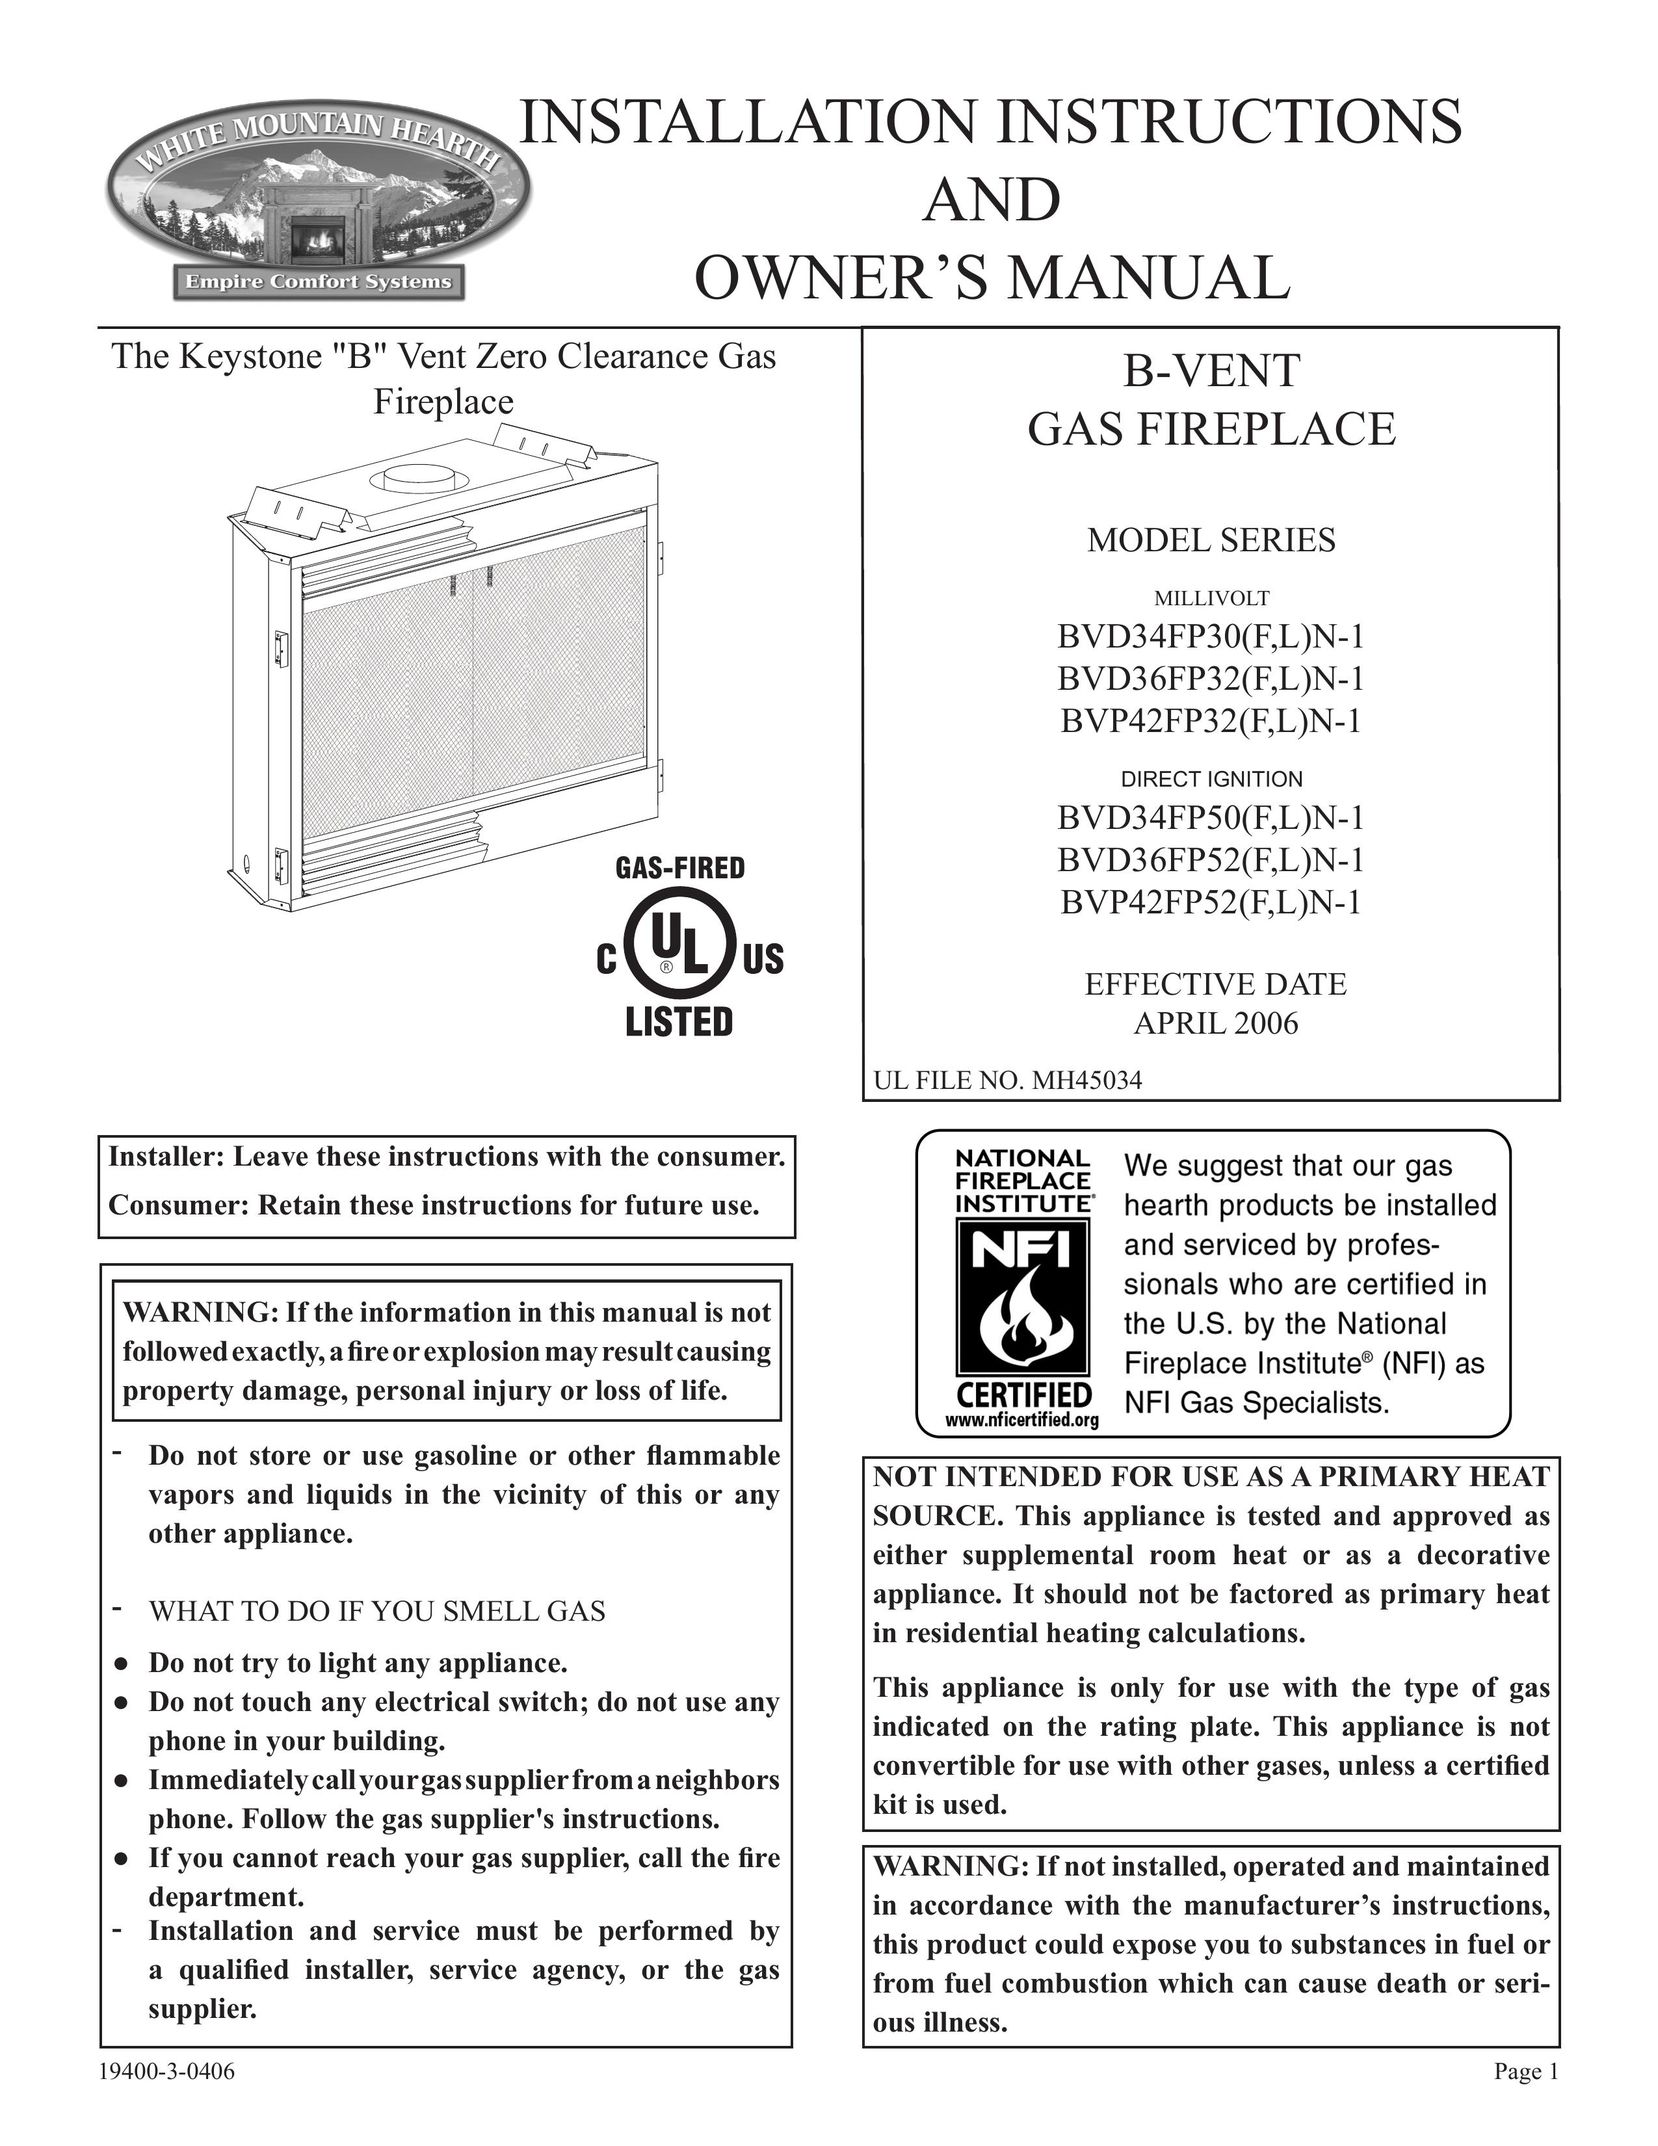 Empire Comfort Systems BVD36FP32 Indoor Fireplace User Manual